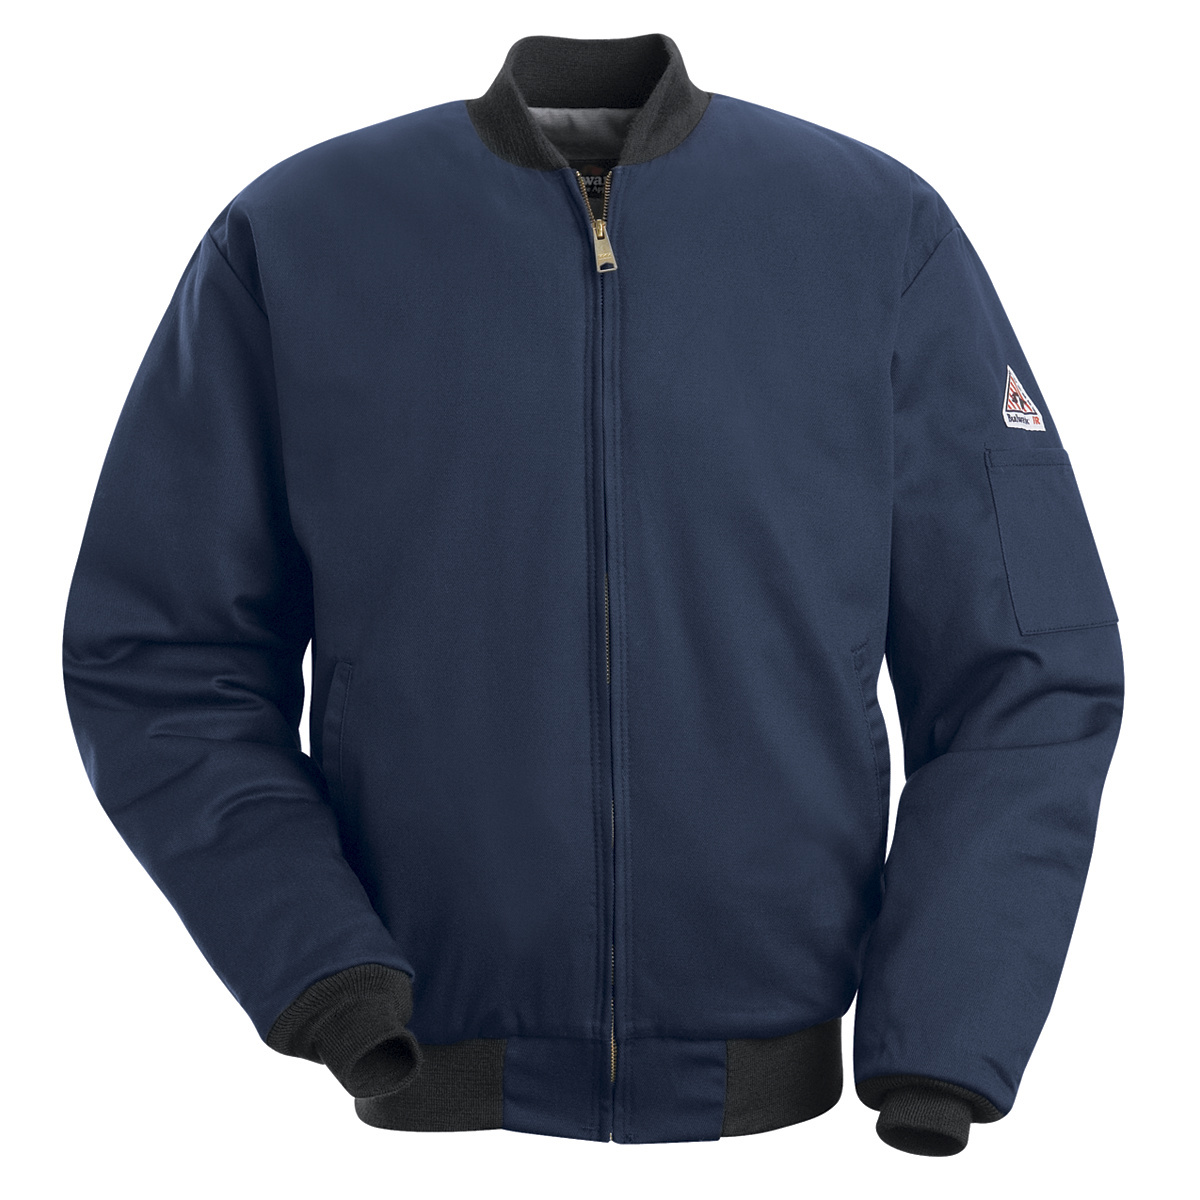 Bulwark® Small| Regular Navy Blue EXCEL FR® Twill Cotton Water Repellent Flame Resistant Jacket With Cotton Lining And Zipper Fr